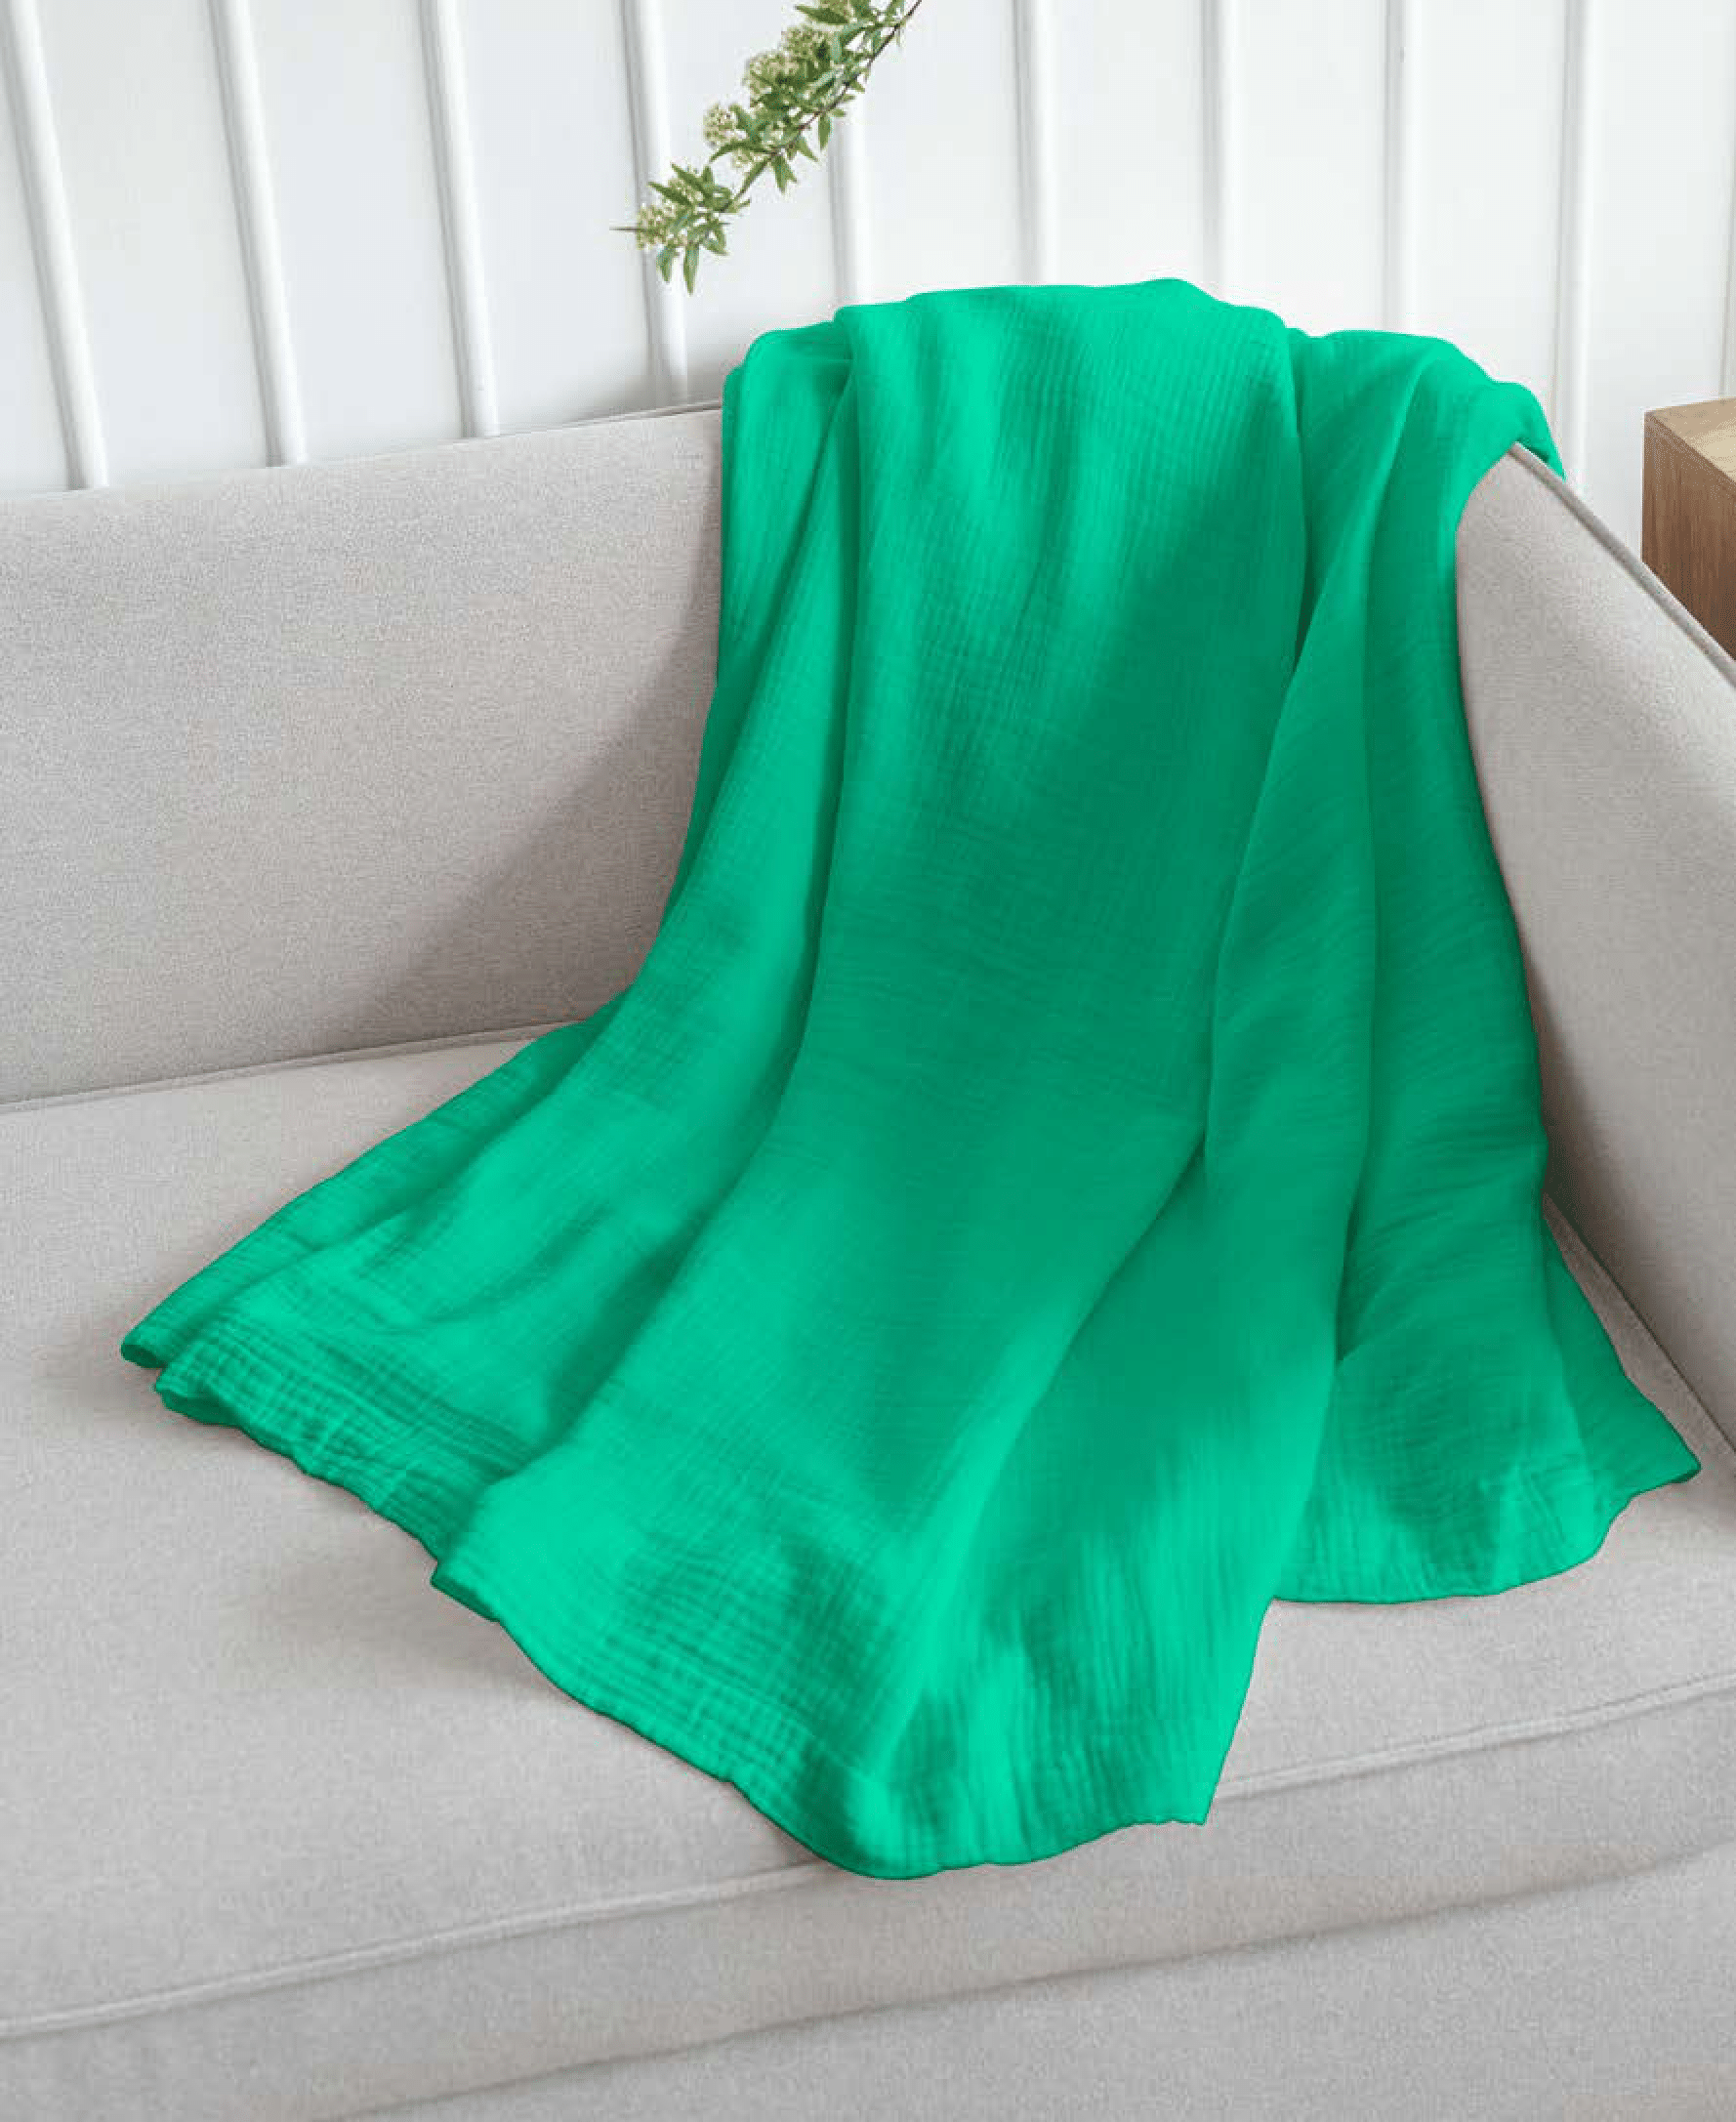 Turquoise Blanket/Throws